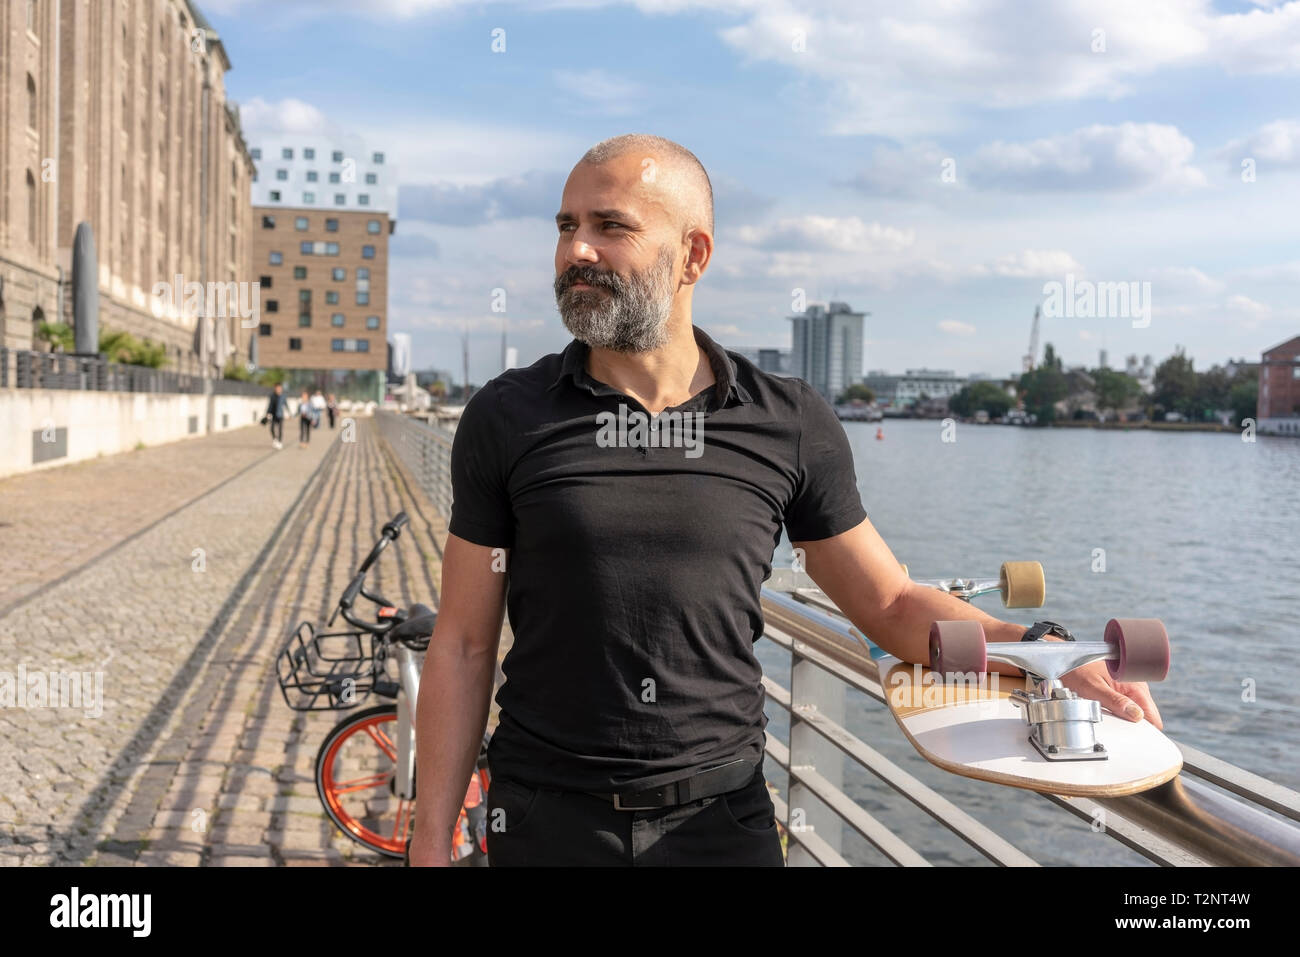 Man holding skateboard on bridge, river and buildings in background, Berlin, Germany Stock Photo